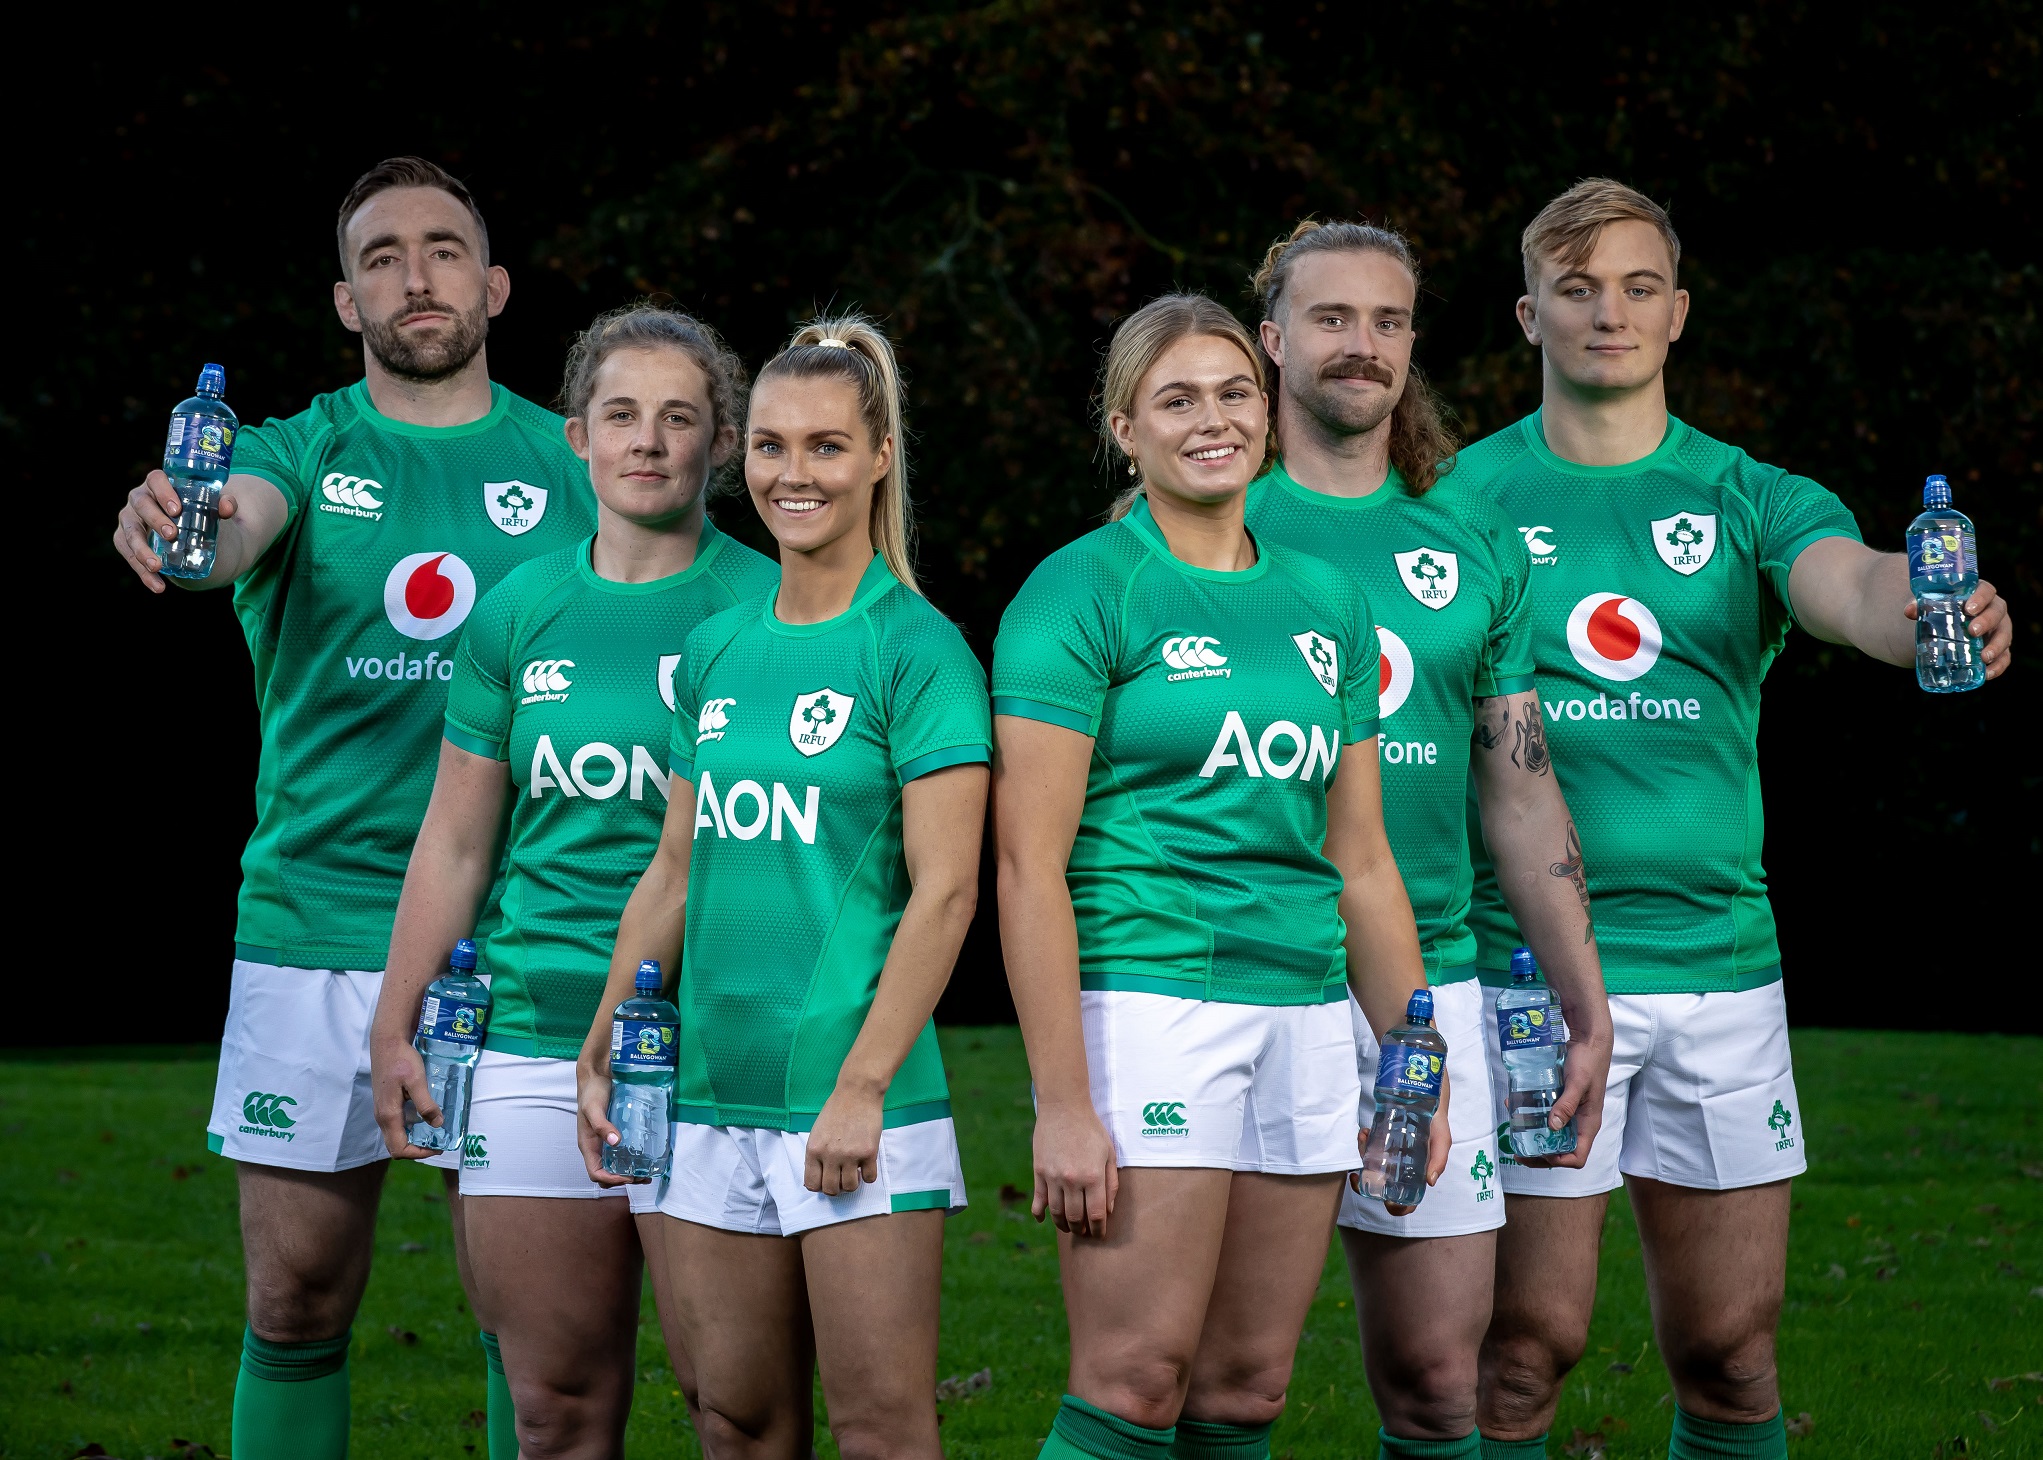 Ballygowan Irish Natural Mineral Water announces four-year sponsorship with Irish Rugby